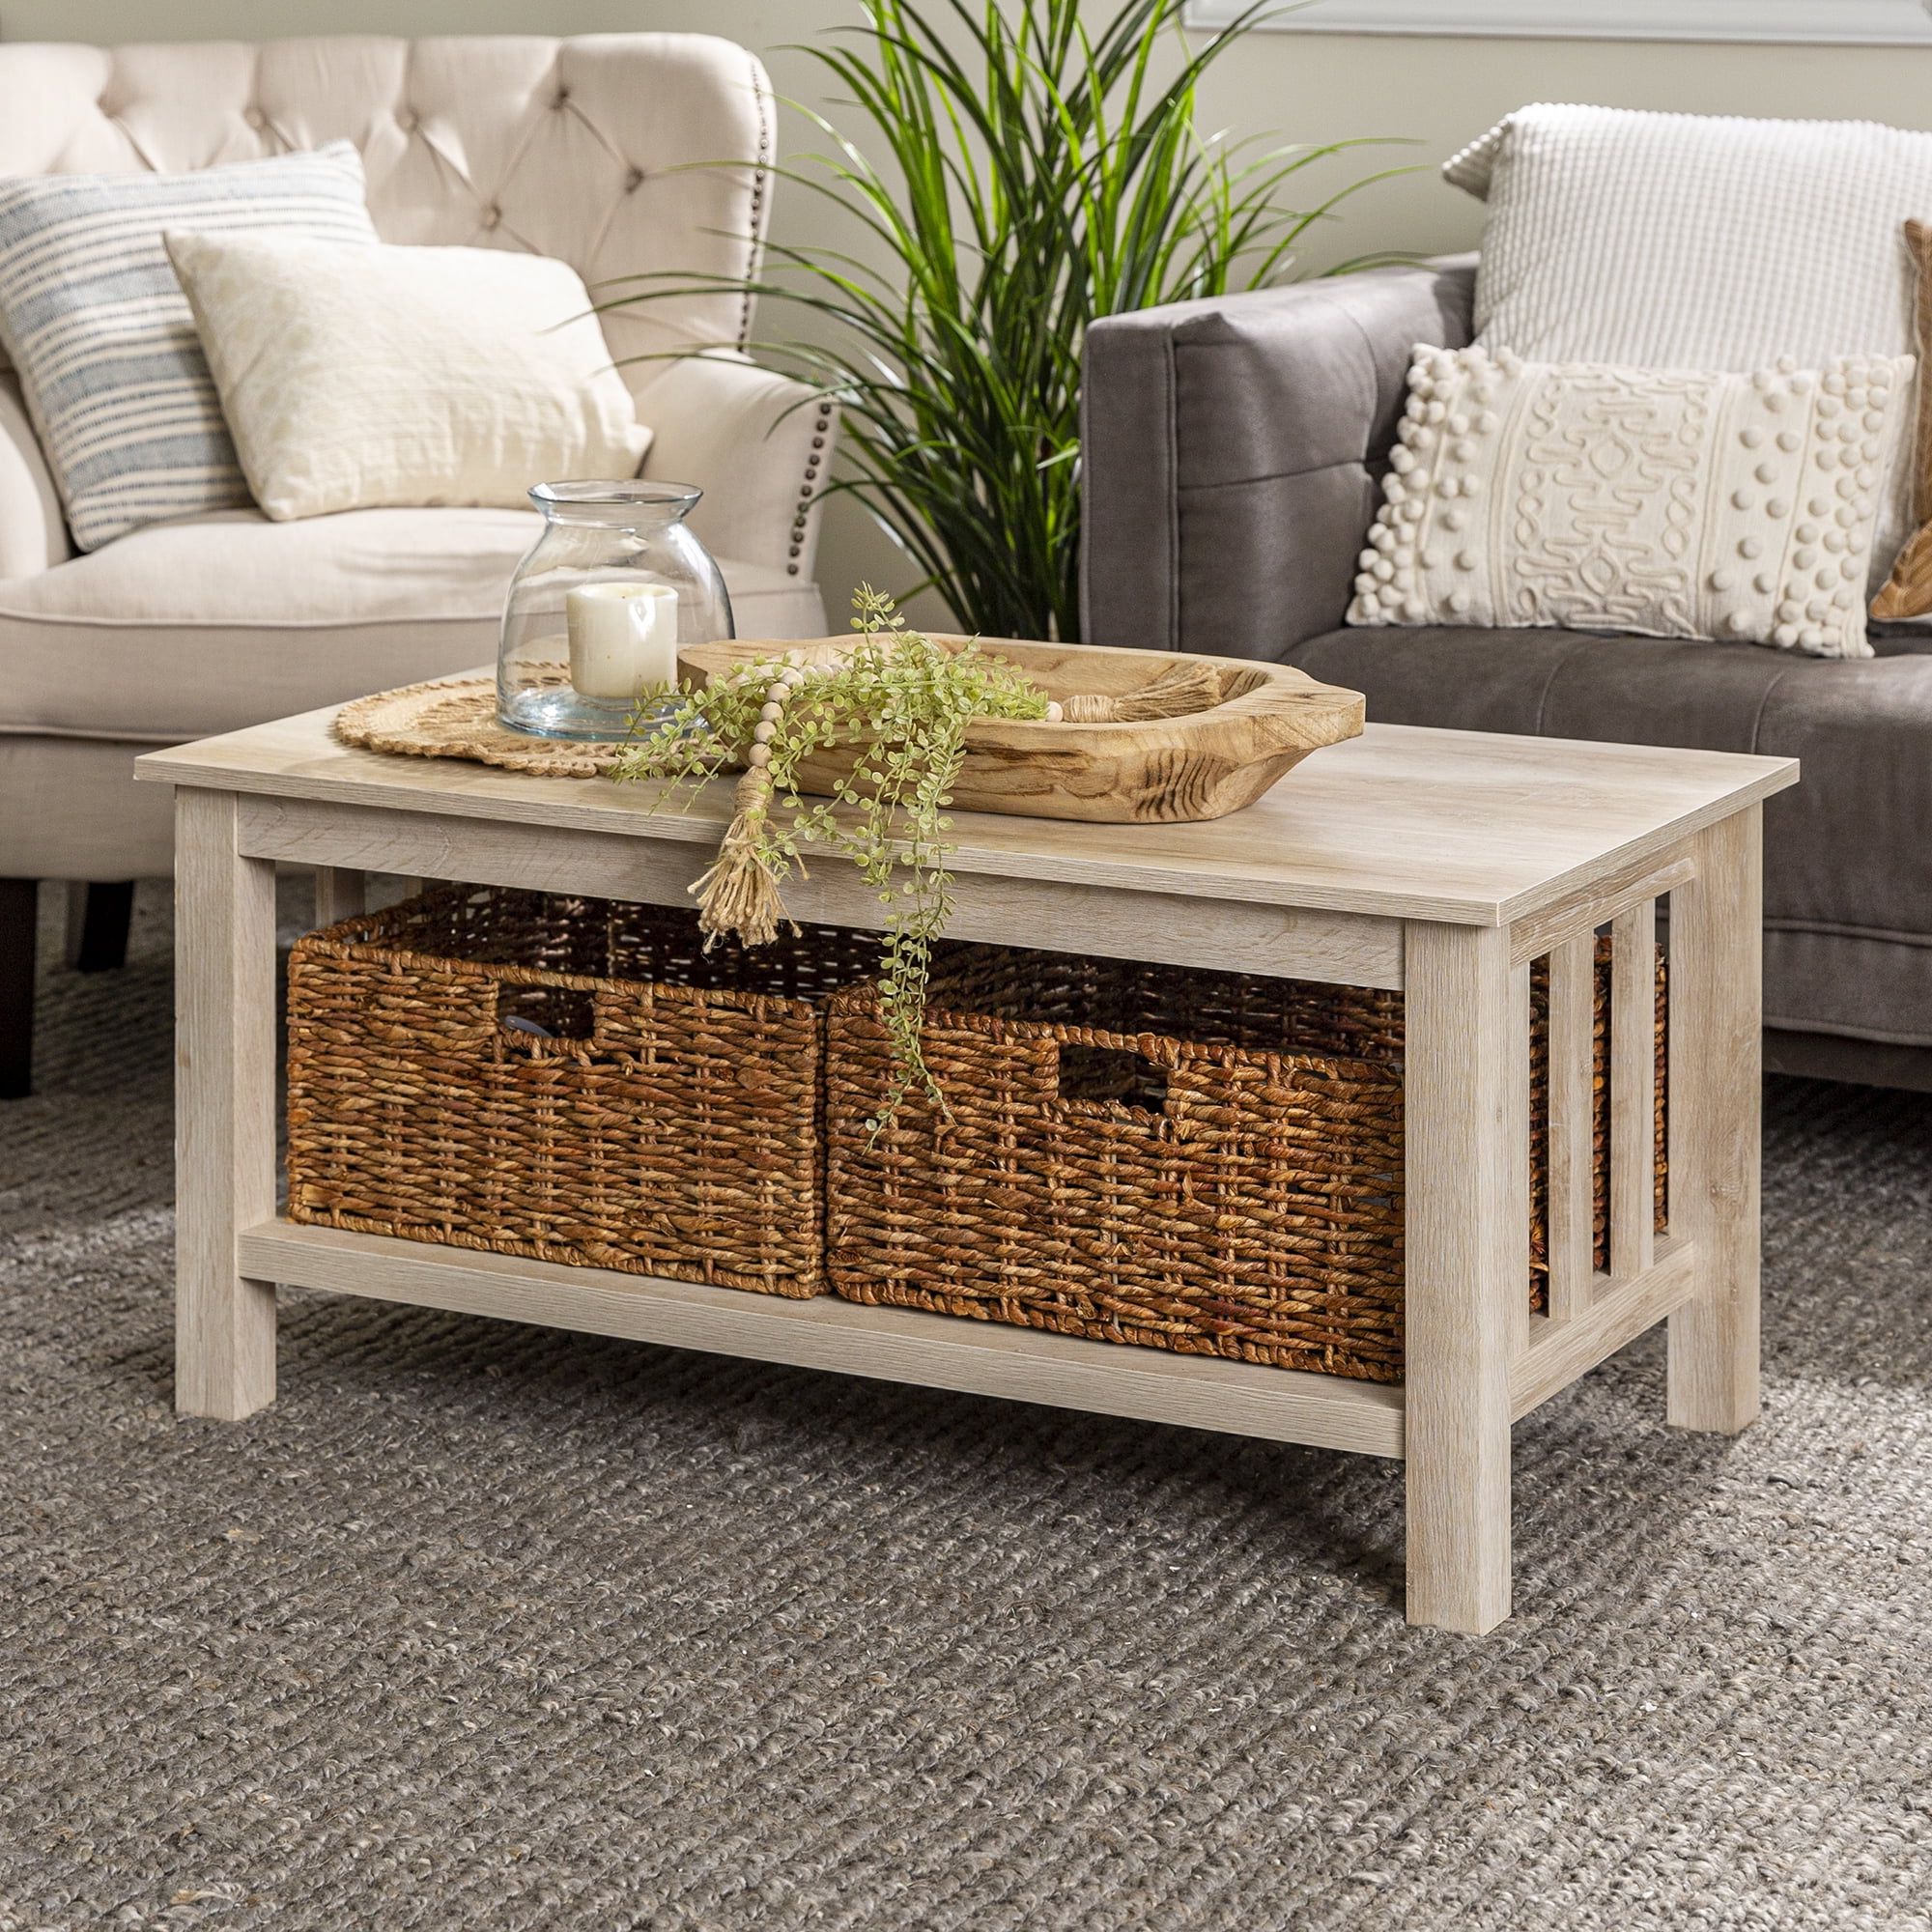 Well Liked Woven Paths Coffee Tables In Woven Paths Traditional Storage Coffee Table With Bins, White Oak –  Walmart (View 2 of 10)